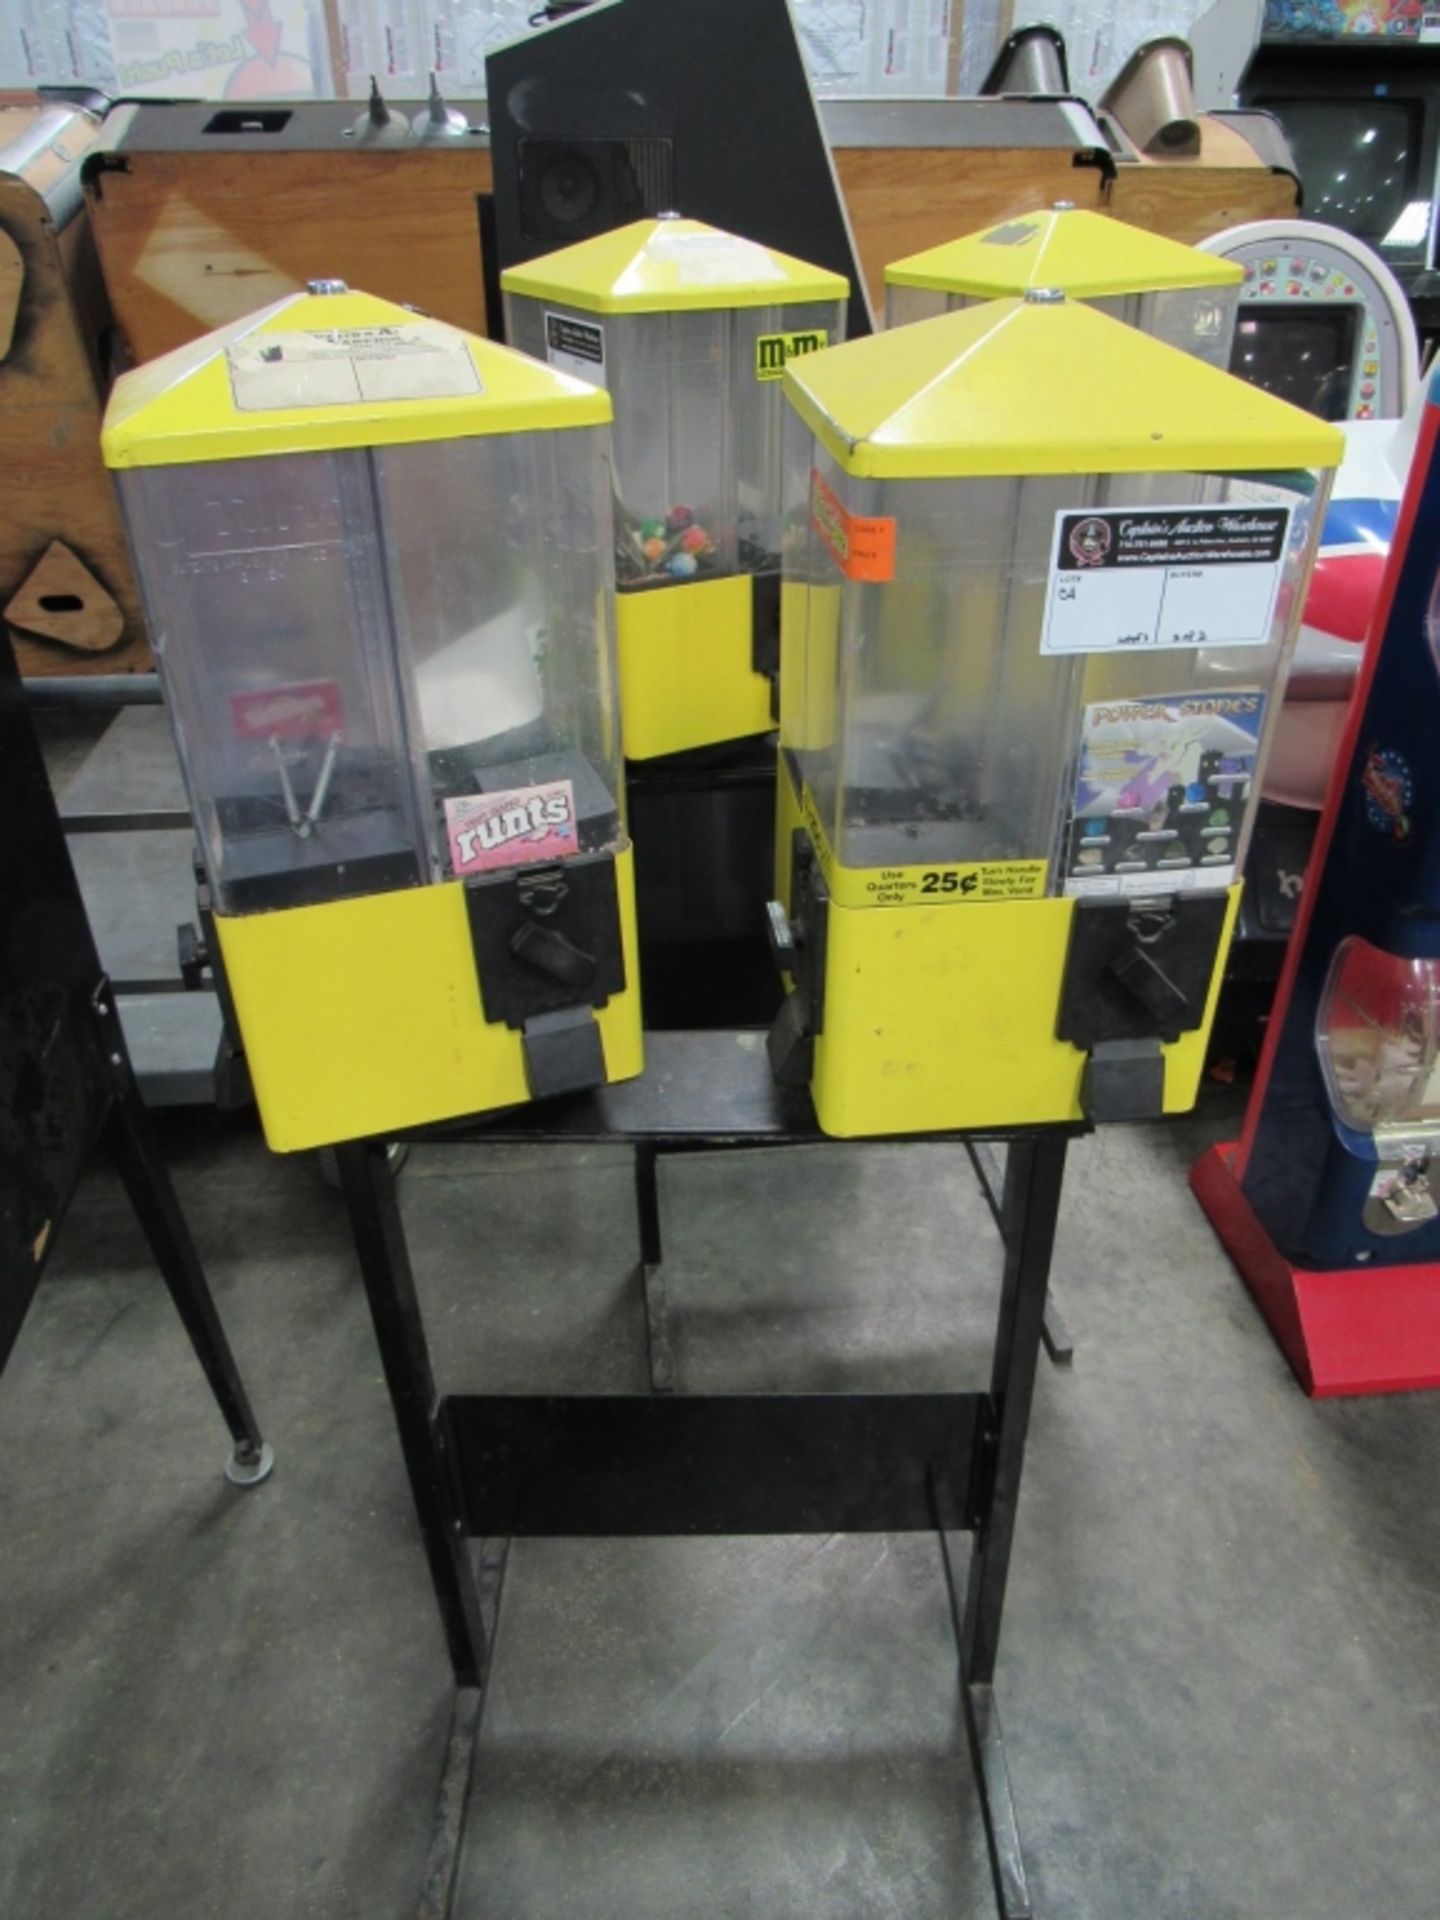 U-TURN DUAL HEAD BULK VENDING STAND LOT OF 2 Item is in used condition. Evidence of wear and - Image 2 of 2